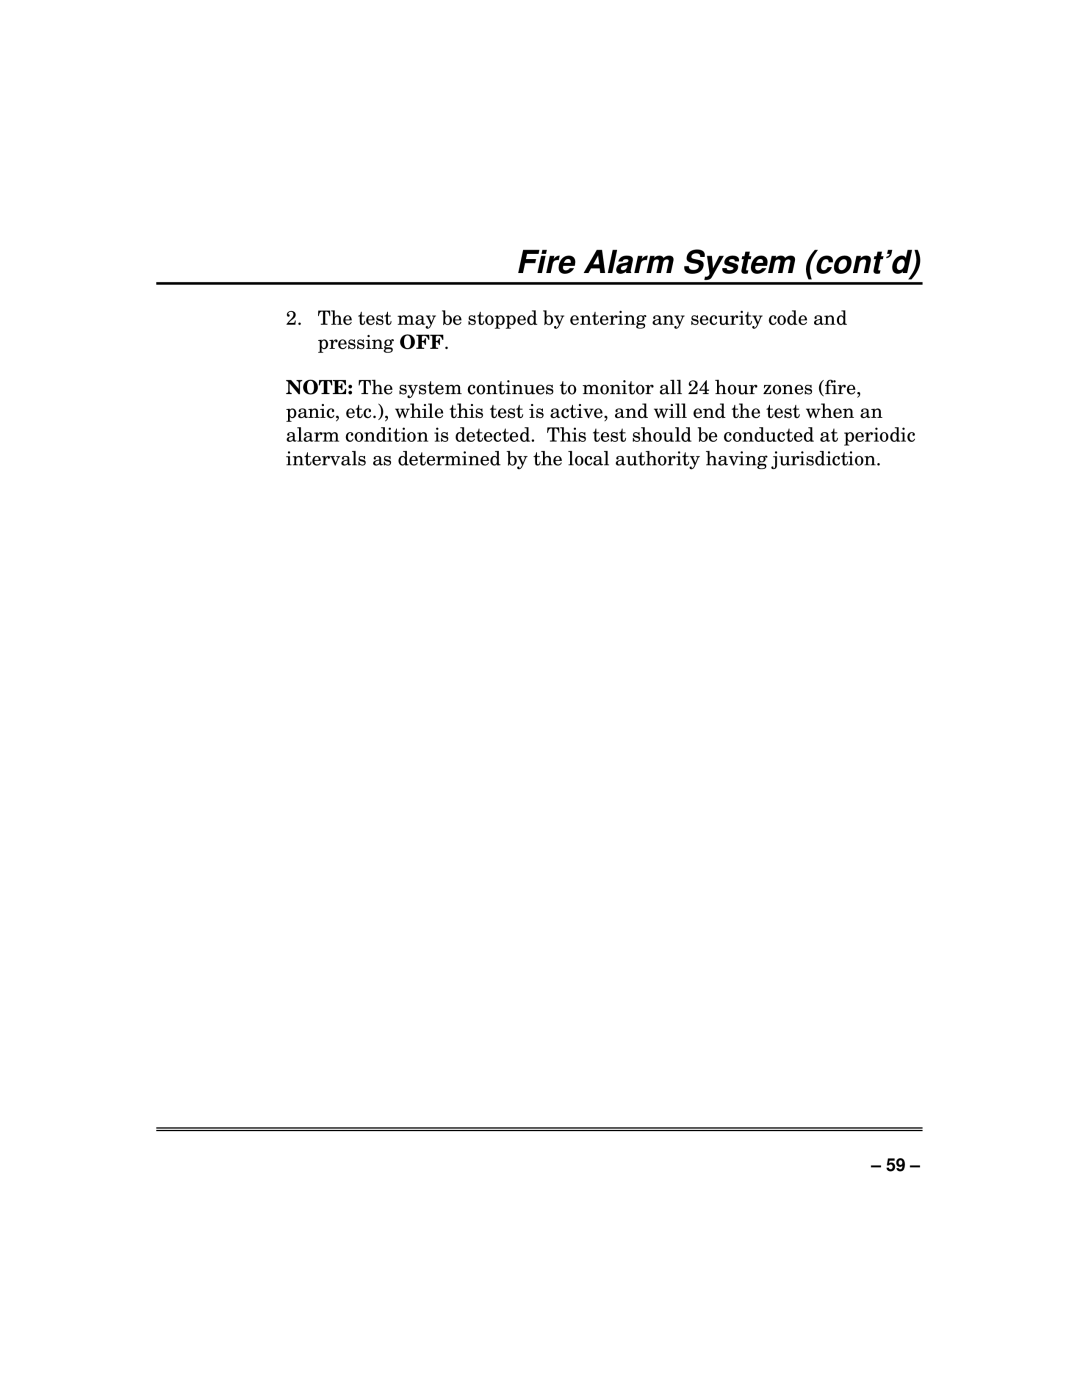 First Alert fire and burglary partitioned security systems with scheduleing manual Fire Alarm System cont’d, 59 